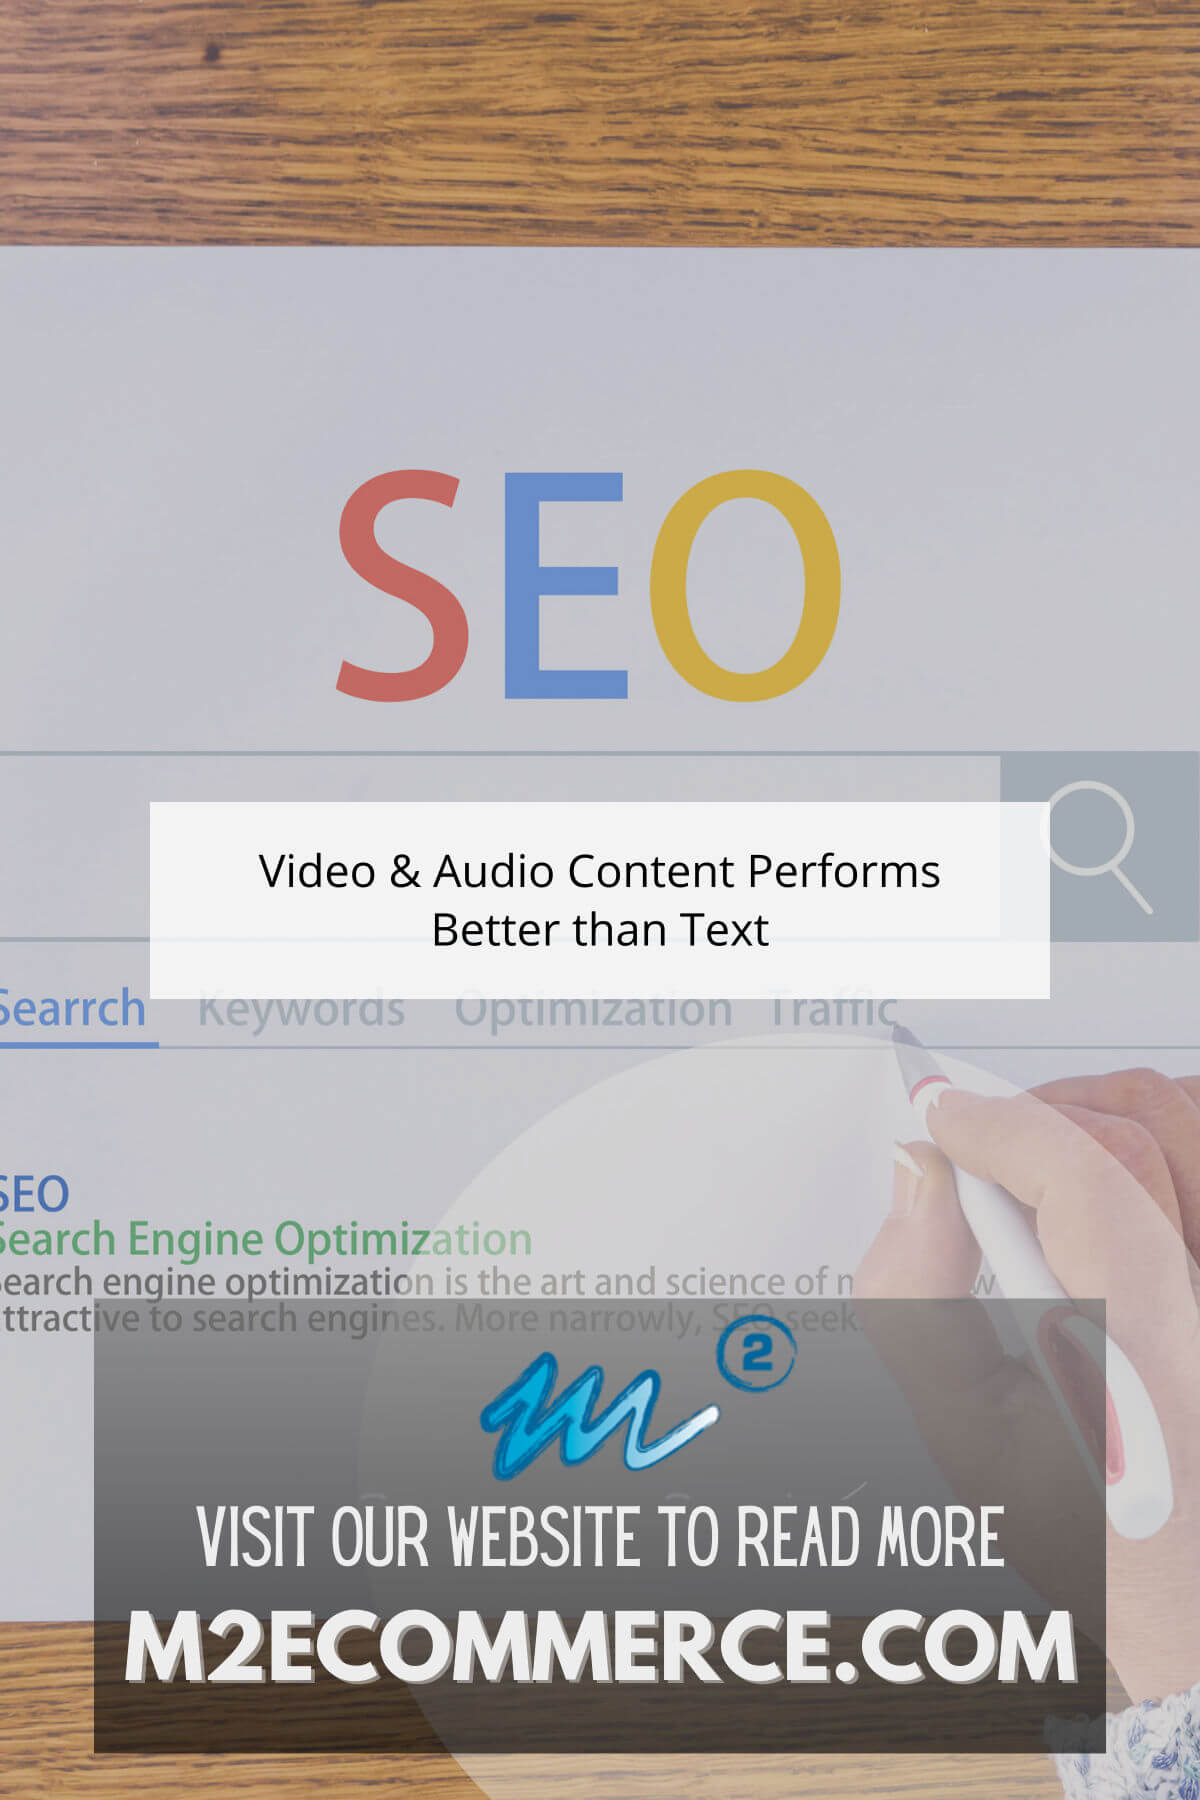 Video & Audio Content Performs Better than Text